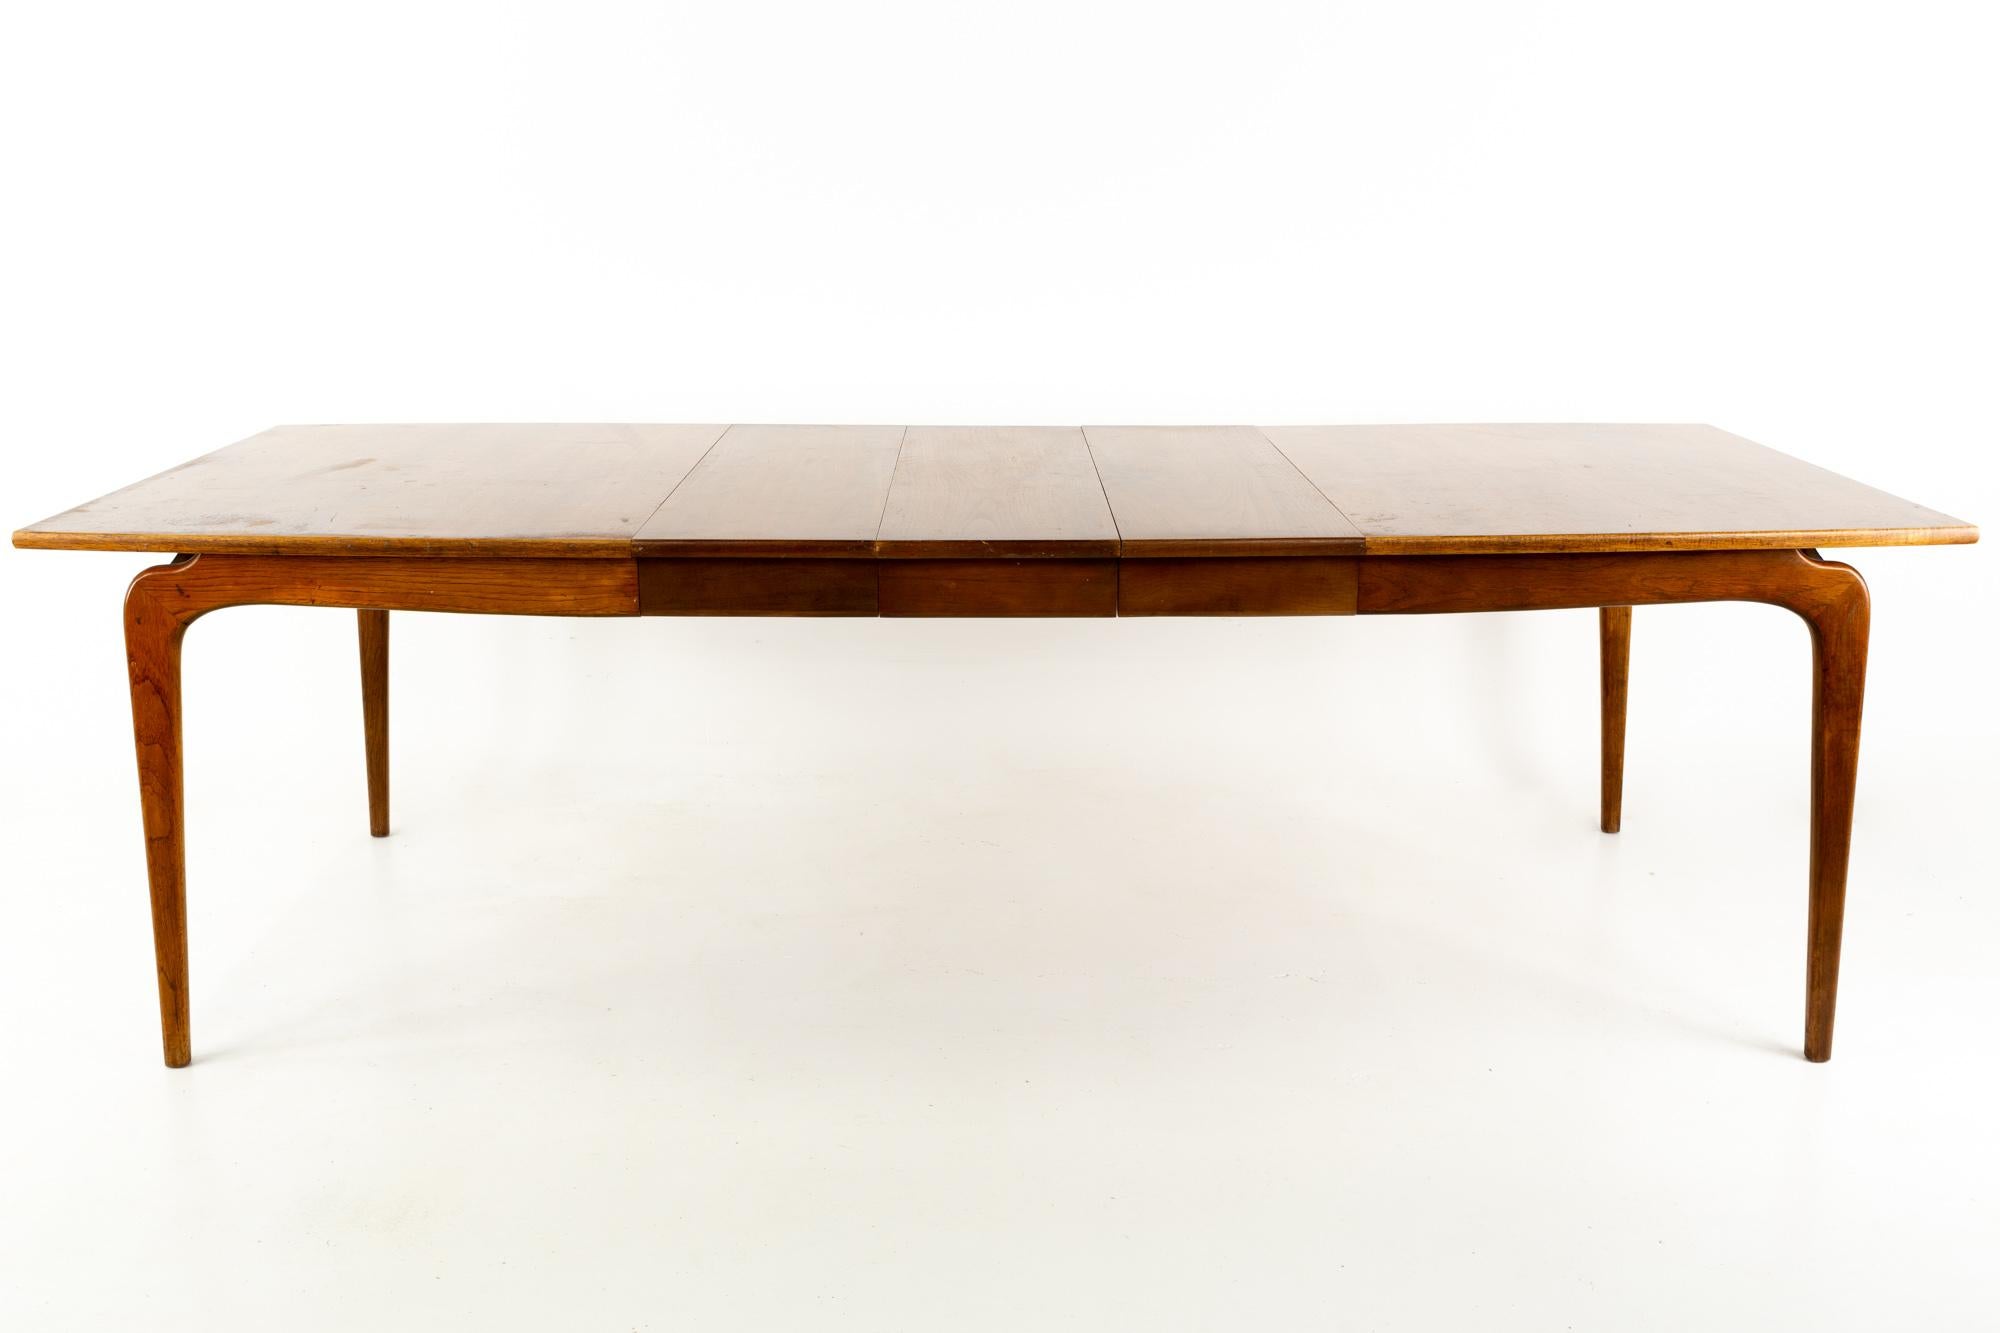 Warren church for Lane perception midcentury 10 person walnut surfboard dining table
This table is 81.5 wide x 42 deep x 29 inches high, and each of the 3 leaves are 12 wide with a chair clearance of 24 inches

All pieces of furniture can be had